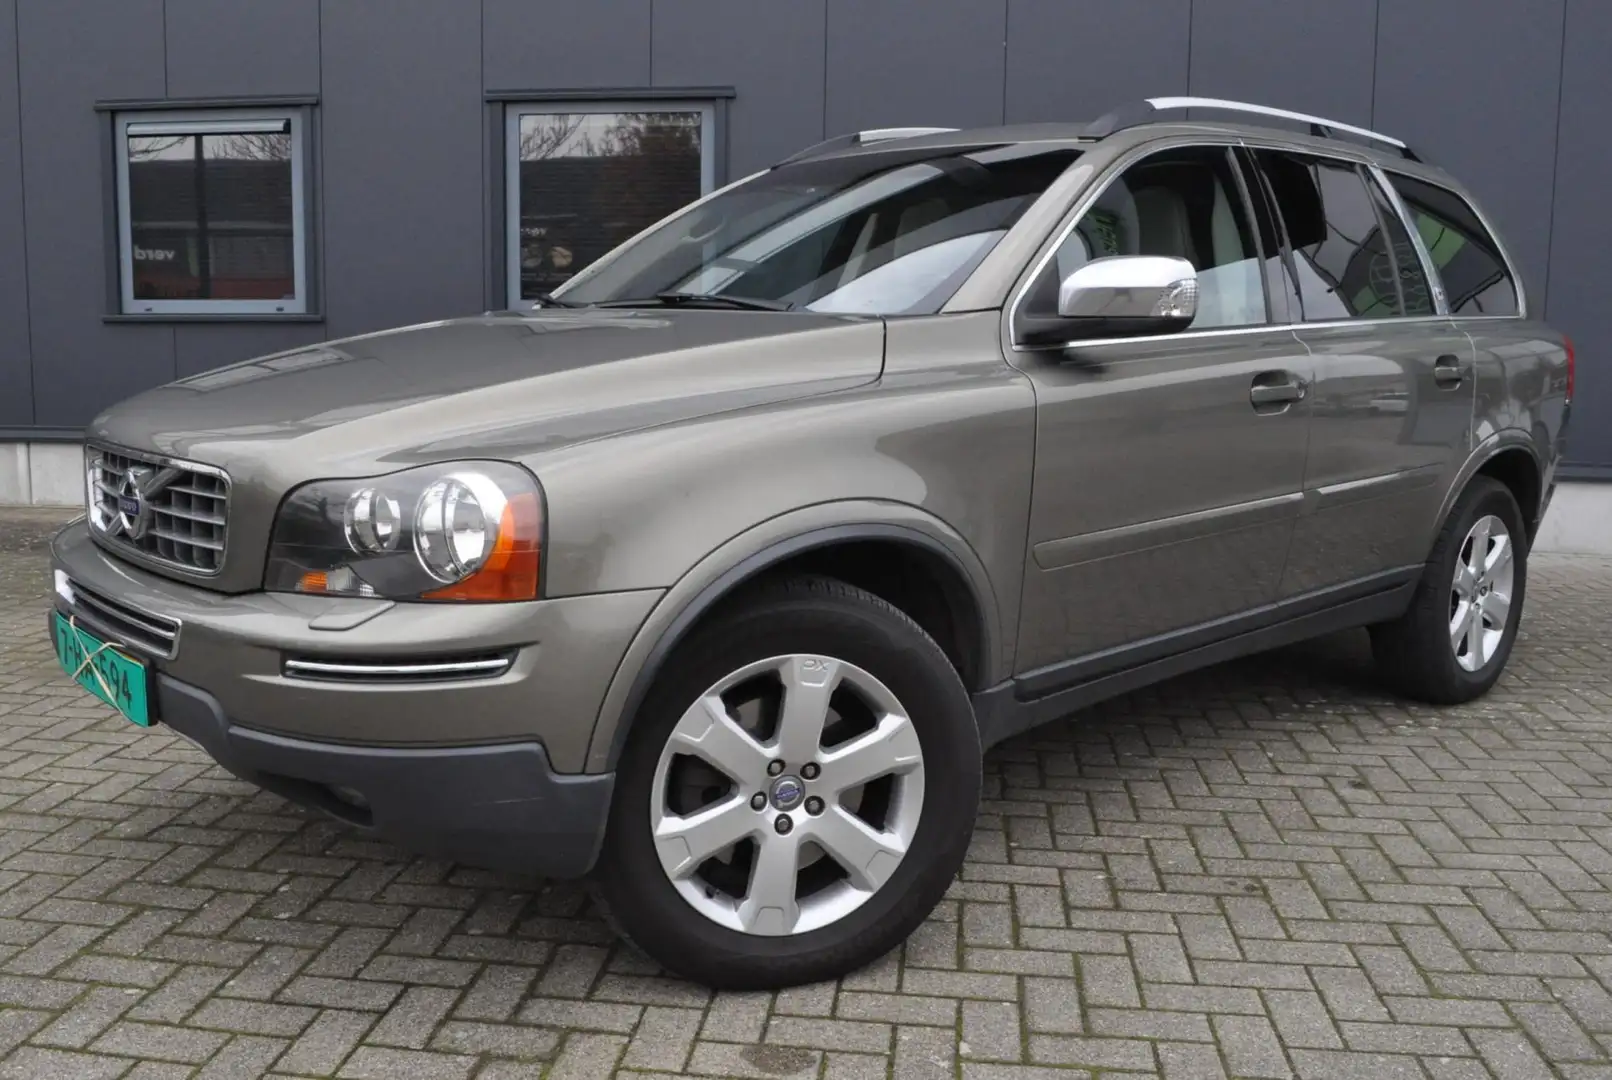 Volvo XC90 4.4 V8 Executive Edition, 188.000km, alle opties, Groen - 2